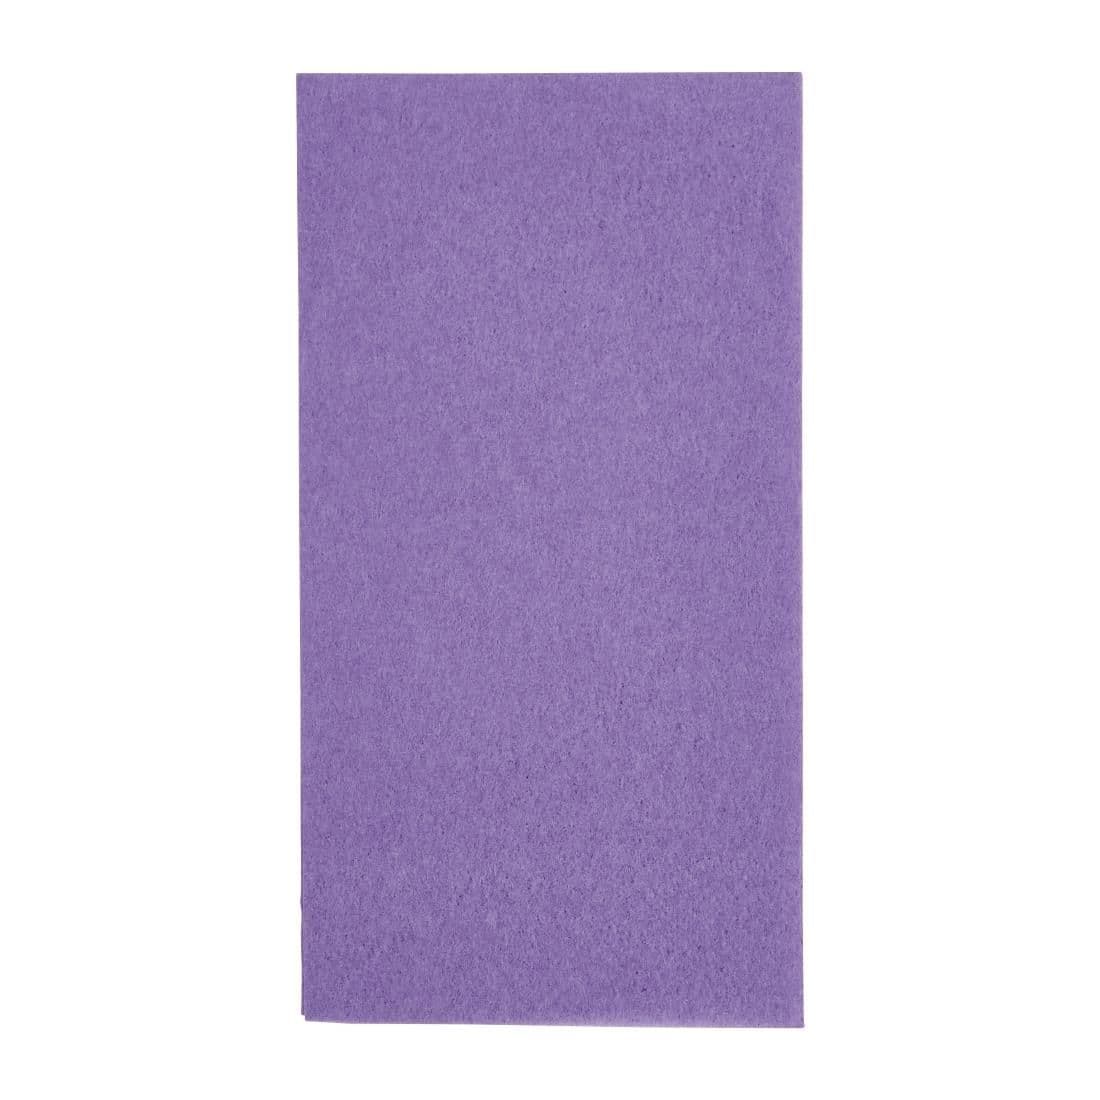 FE232 Fiesta Lunch Napkins Plum 330mm (Pack of 2000) JD Catering Equipment Solutions Ltd